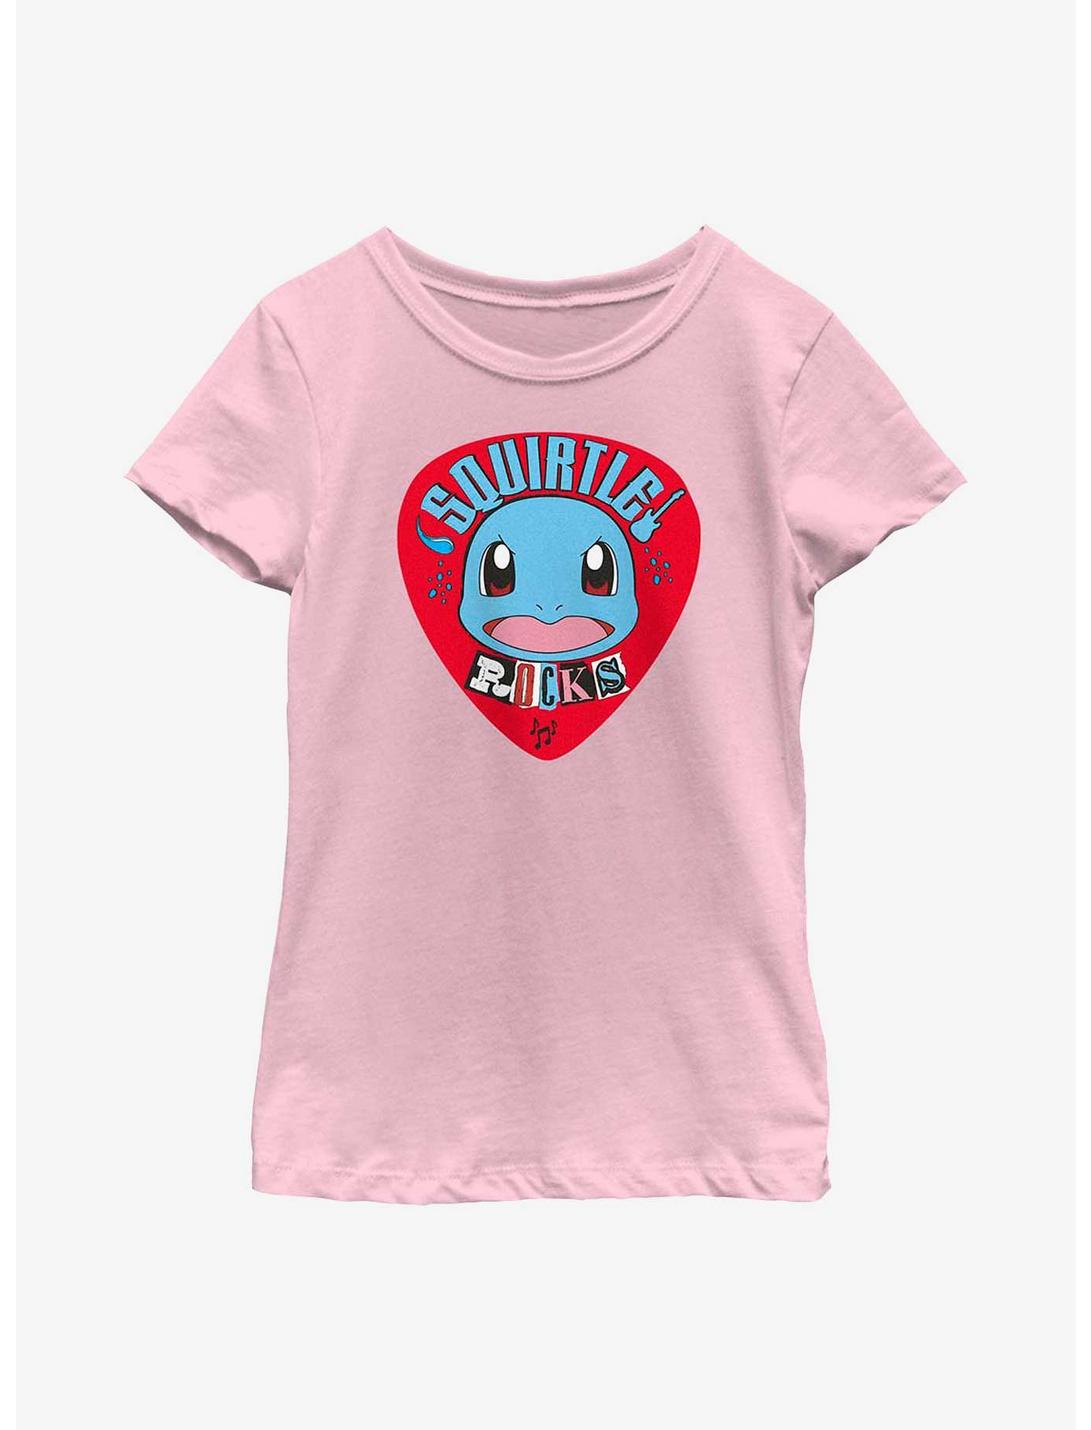 Pokemon Squirtle Rocks Youth Girls T-Shirt, PINK, hi-res